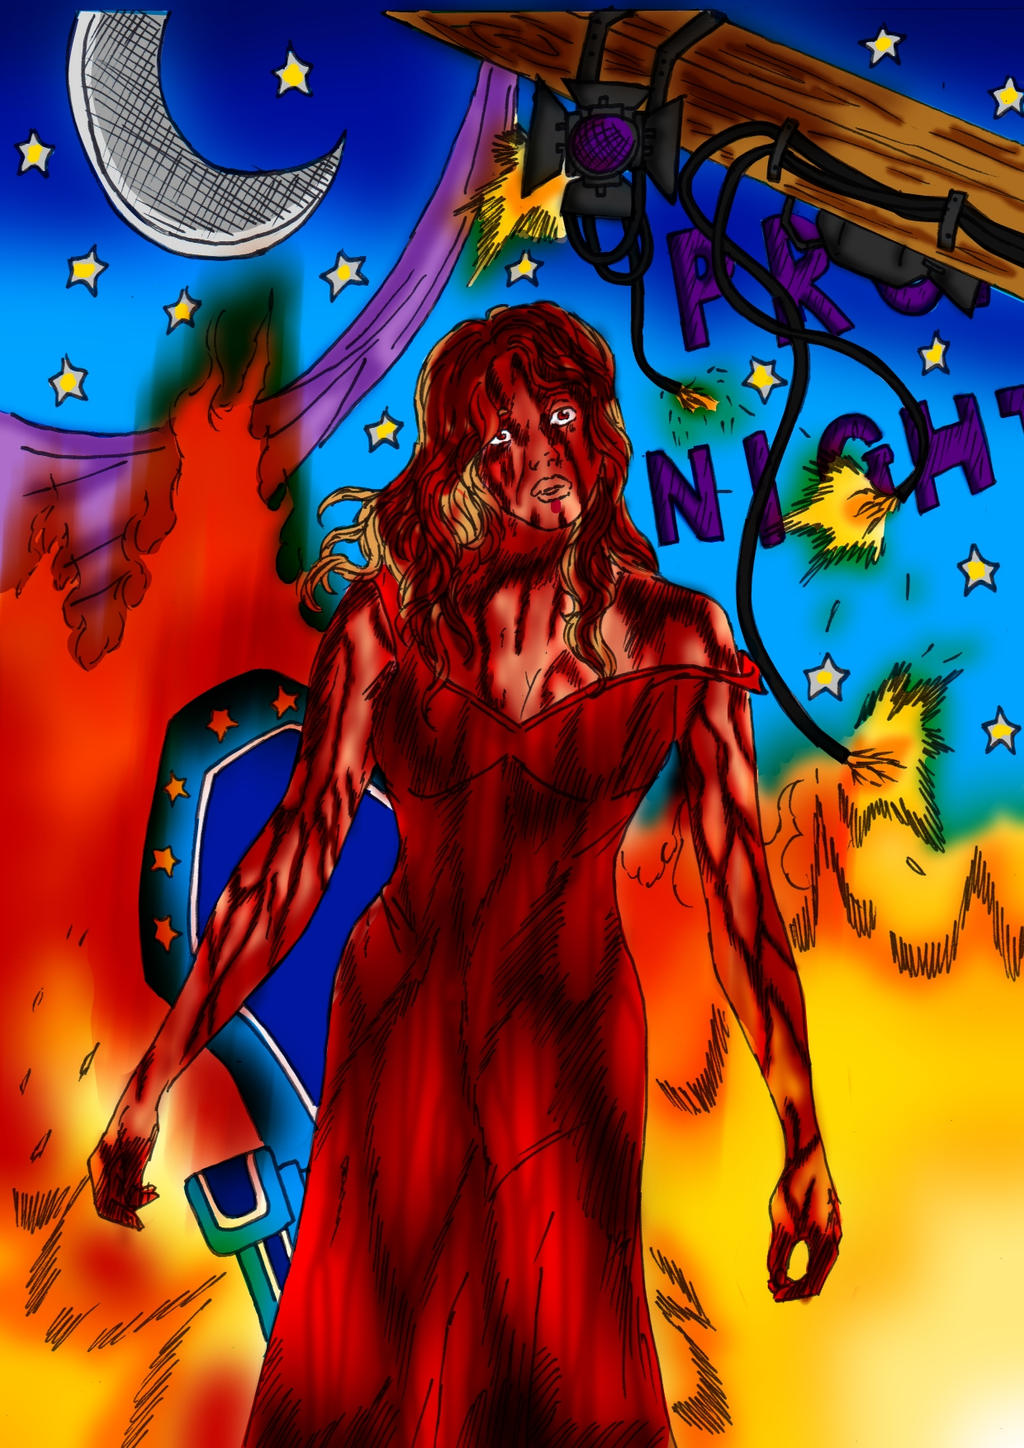 Carrie~The Destruction by Comicbookguy54321 on DeviantArt
